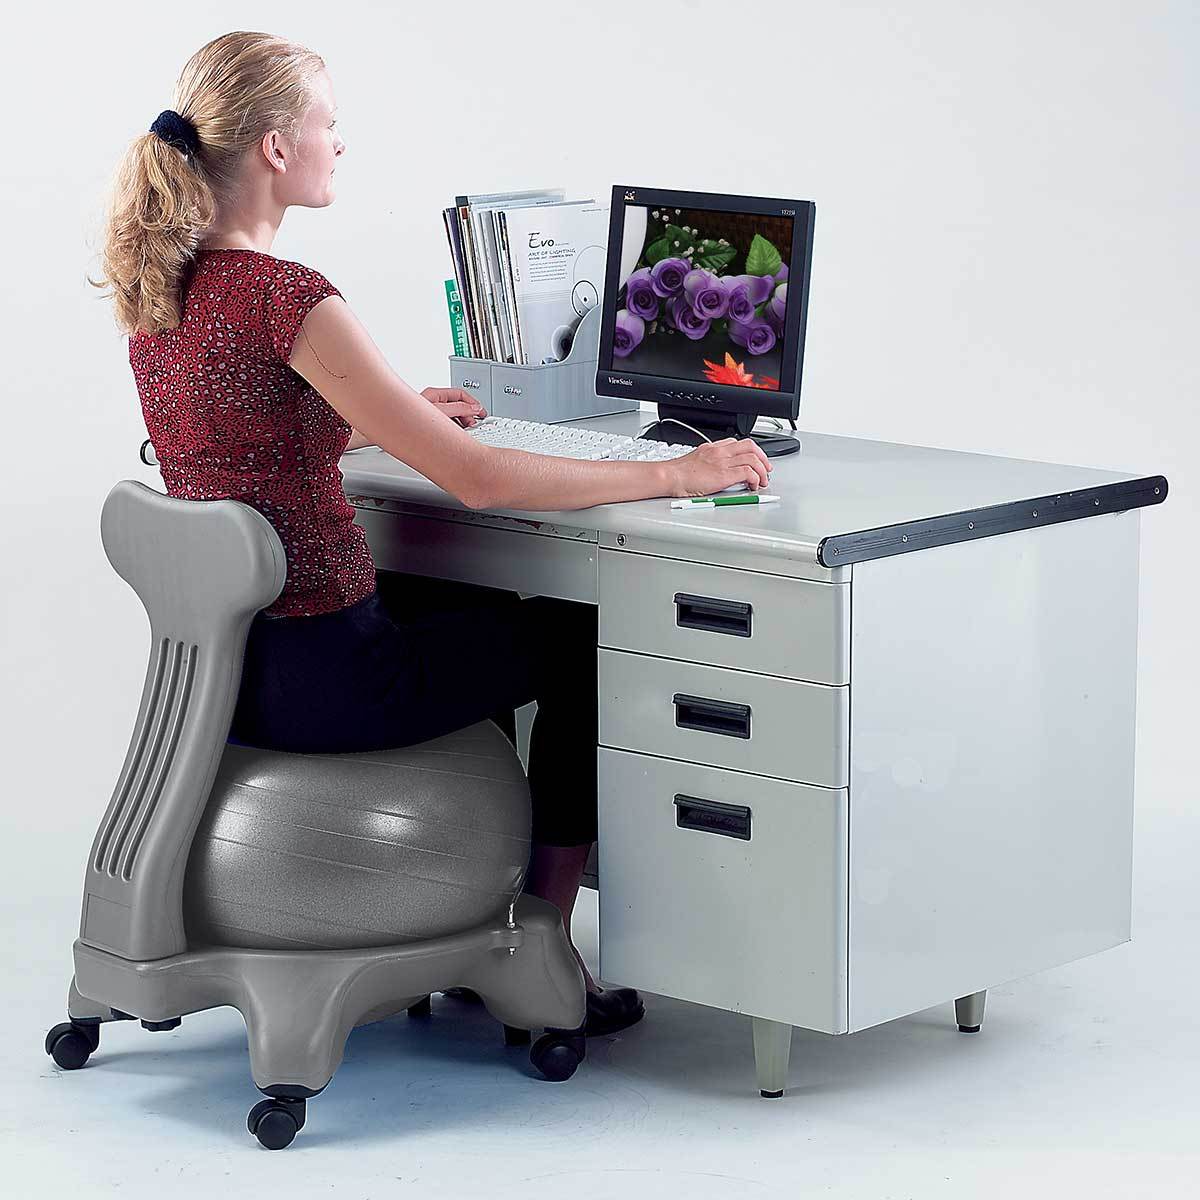 I have lower back pain. Should I seat on a stability ball at the office?